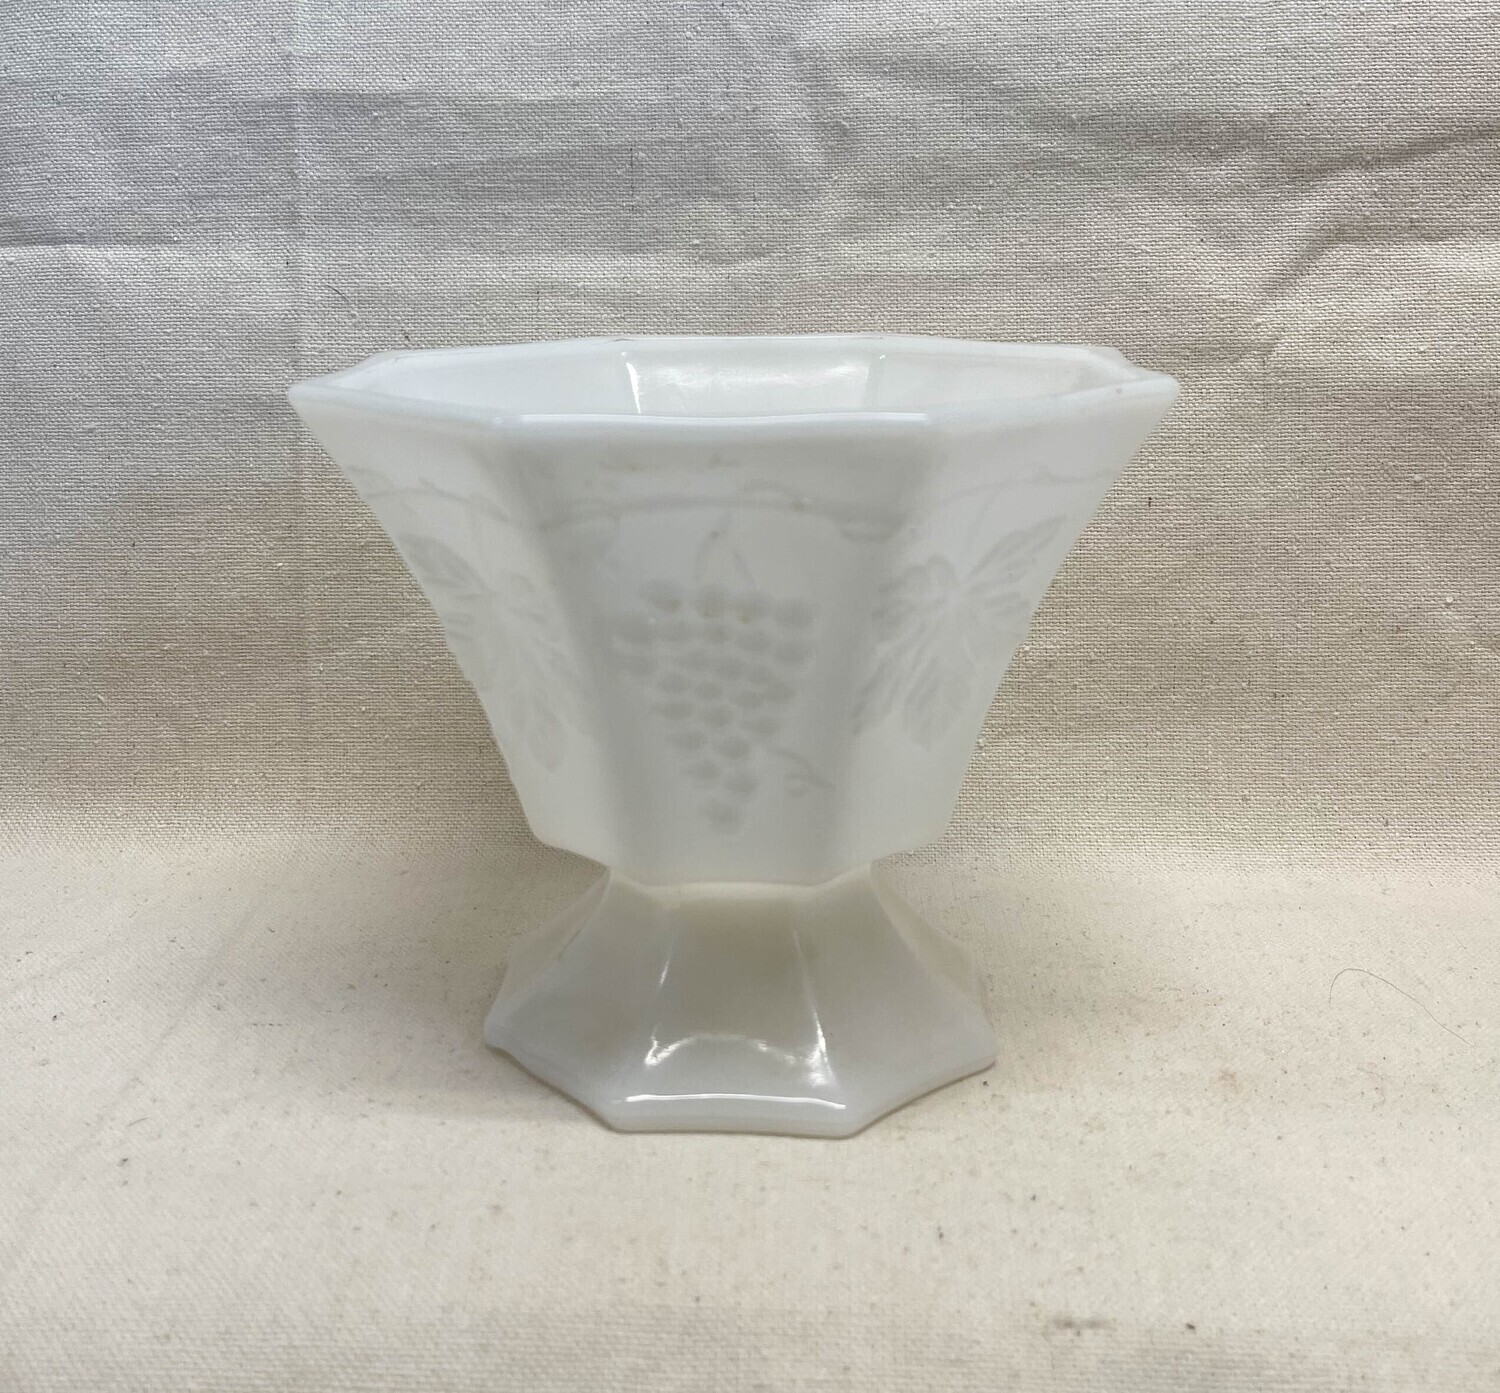 1970s Anchor Hocking Milk Glass Compote No Lid